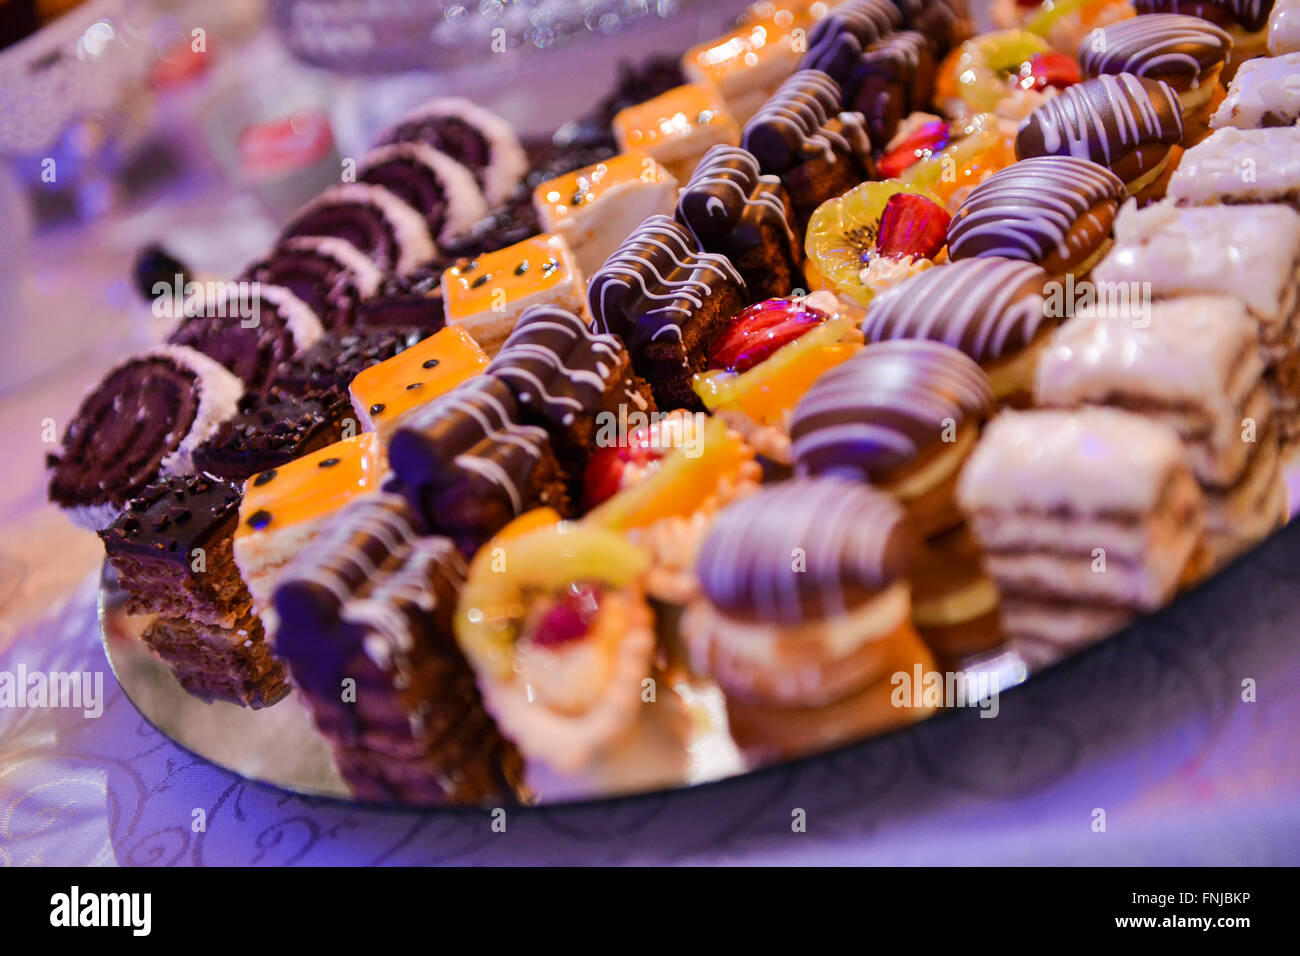 Different type of cakes on a plate and with side light Stock Photo